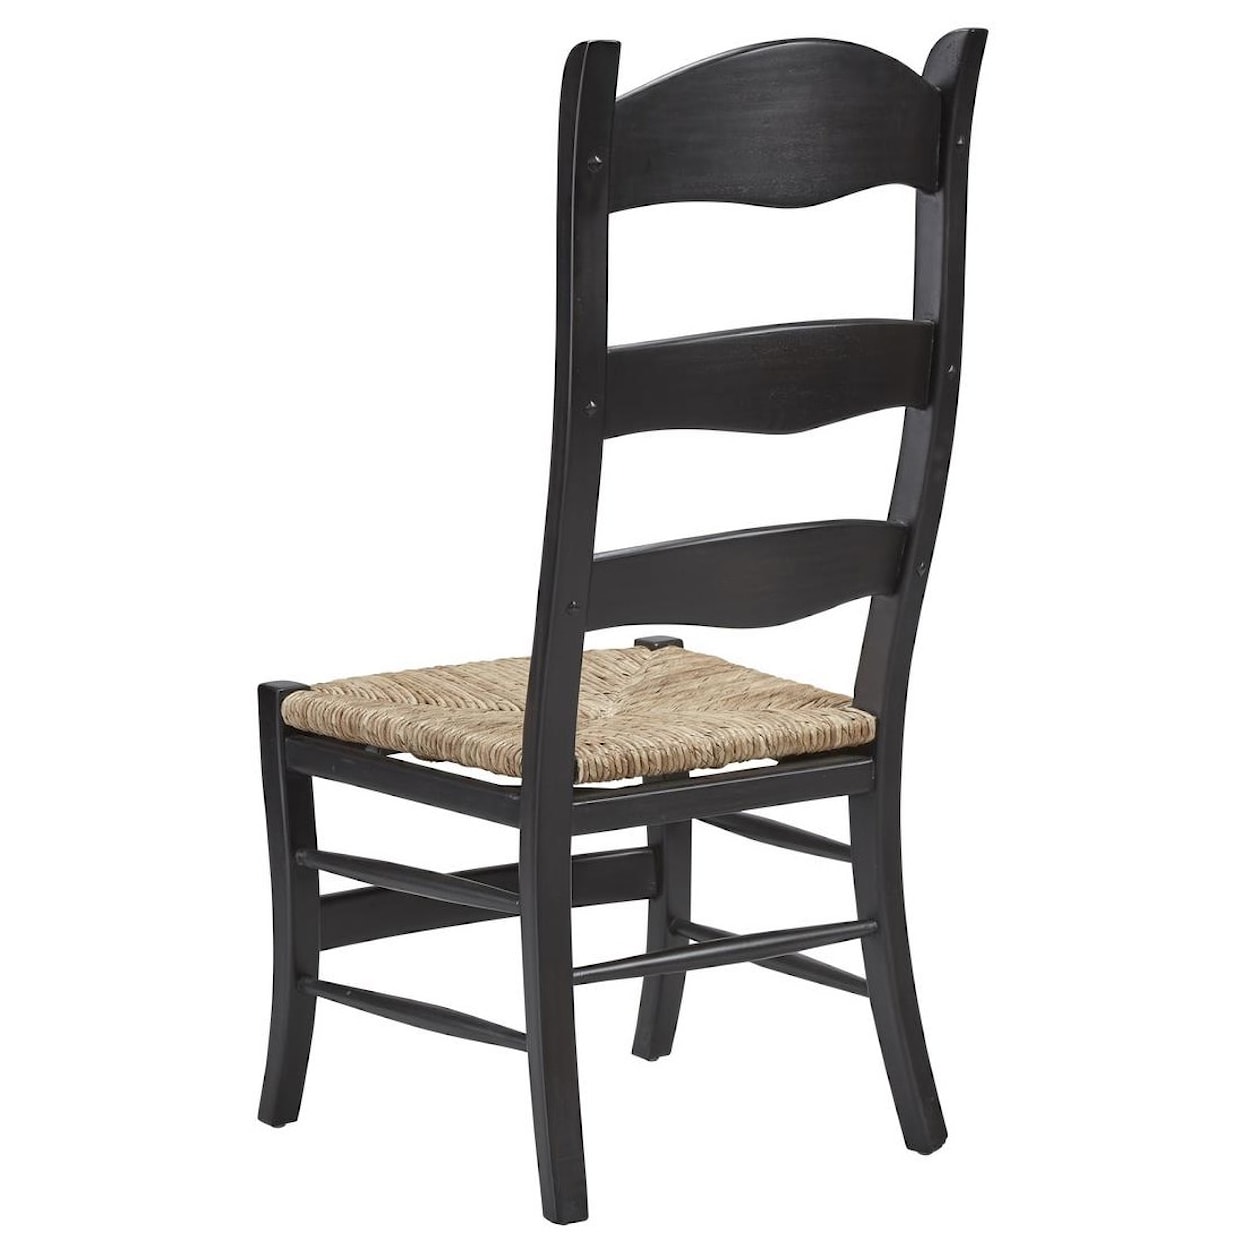 Furniture Classics Dining Ladderback Side Chair